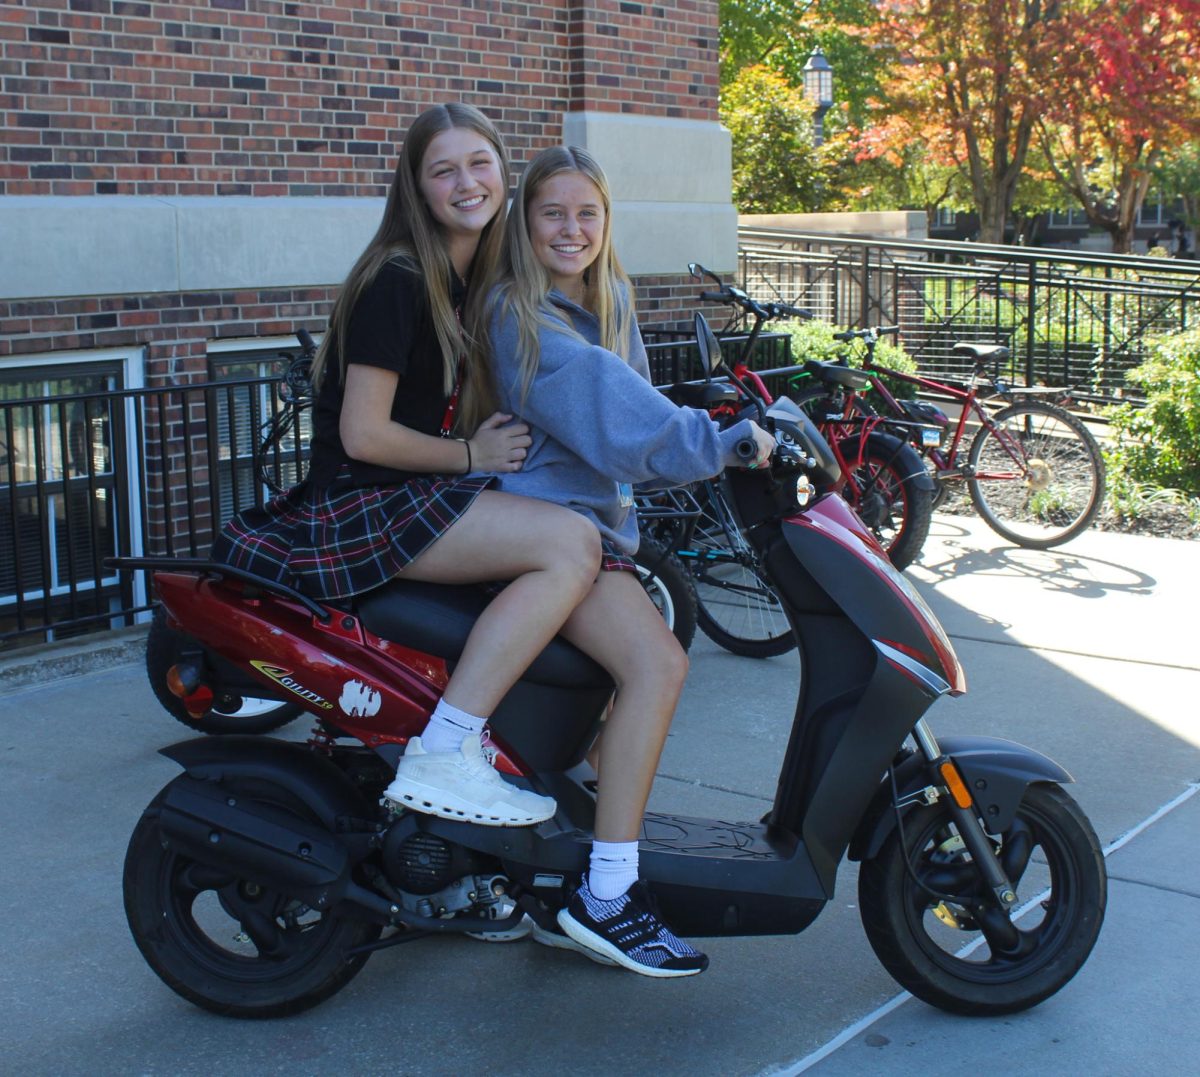 Freshmen+Evelyn+Batz+and+Dory+Hodes+pose+on+Hodess+electric+moped.+She+rides+this+moped+to+school+almost+everyday.+photo+by+Lina+Kilgore